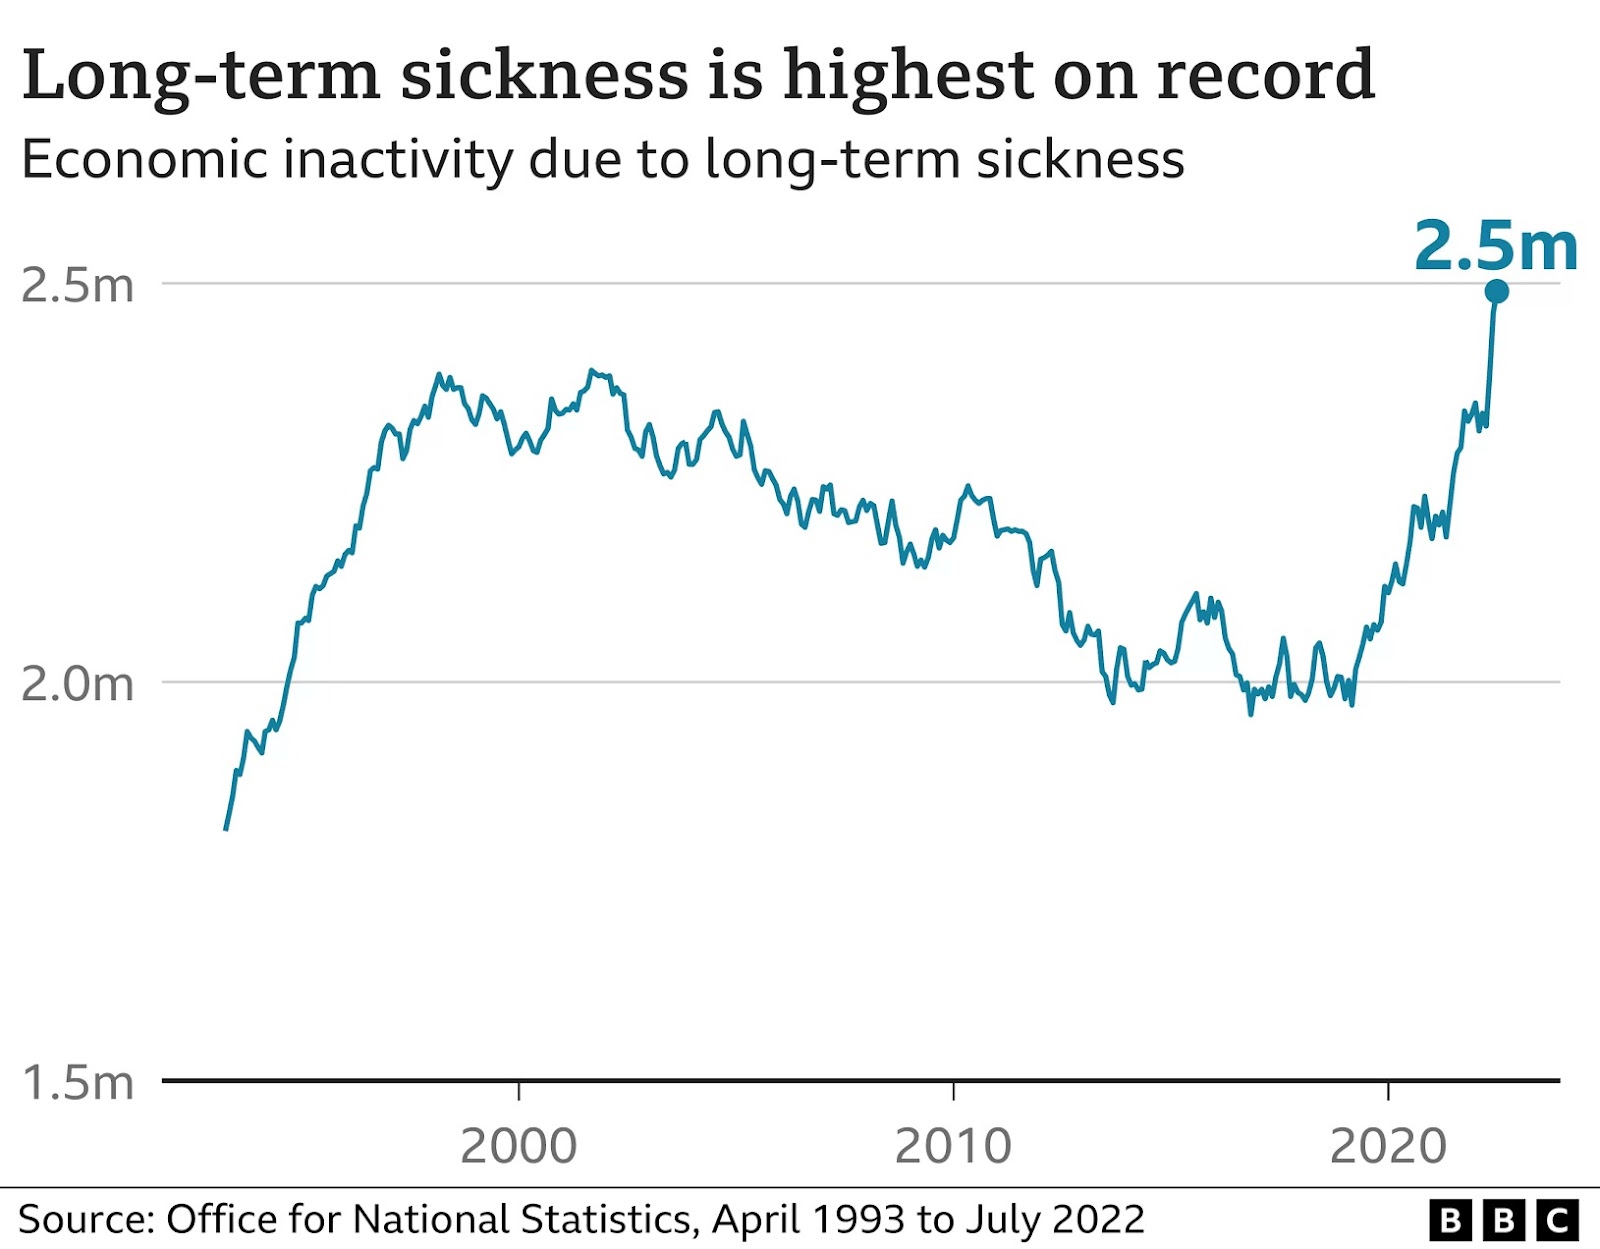 UK: Unemployment rises as long-term illness hits record high